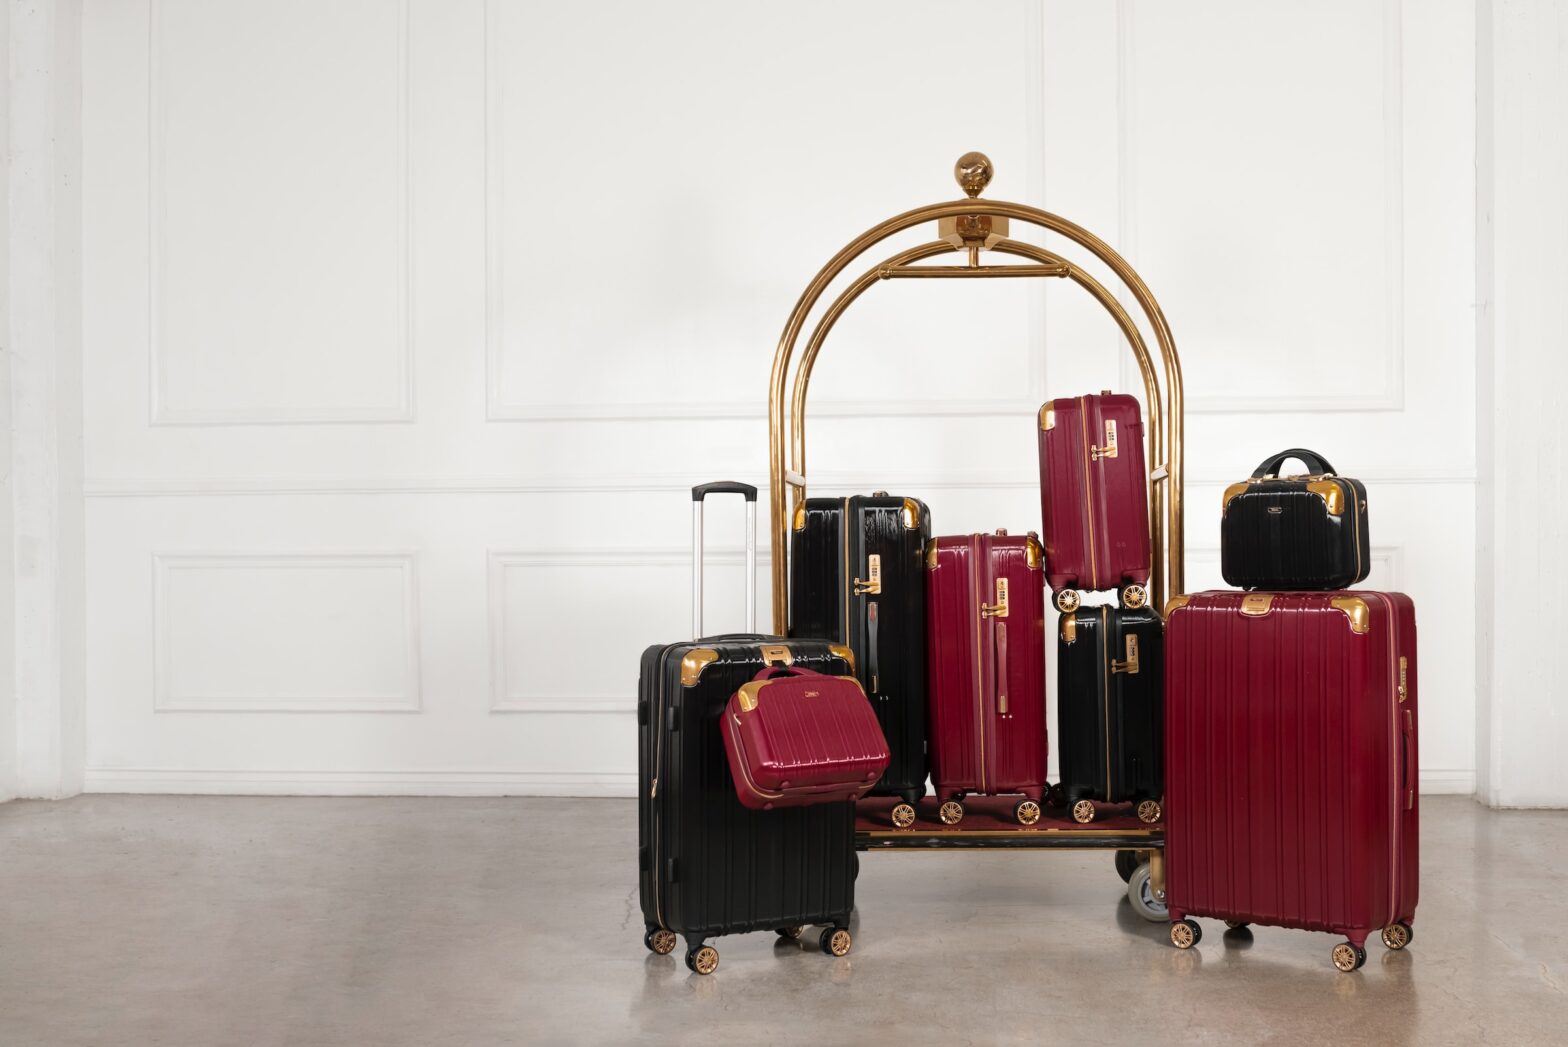 Luggage Finds: Top Rated Checked Bags on Amazon